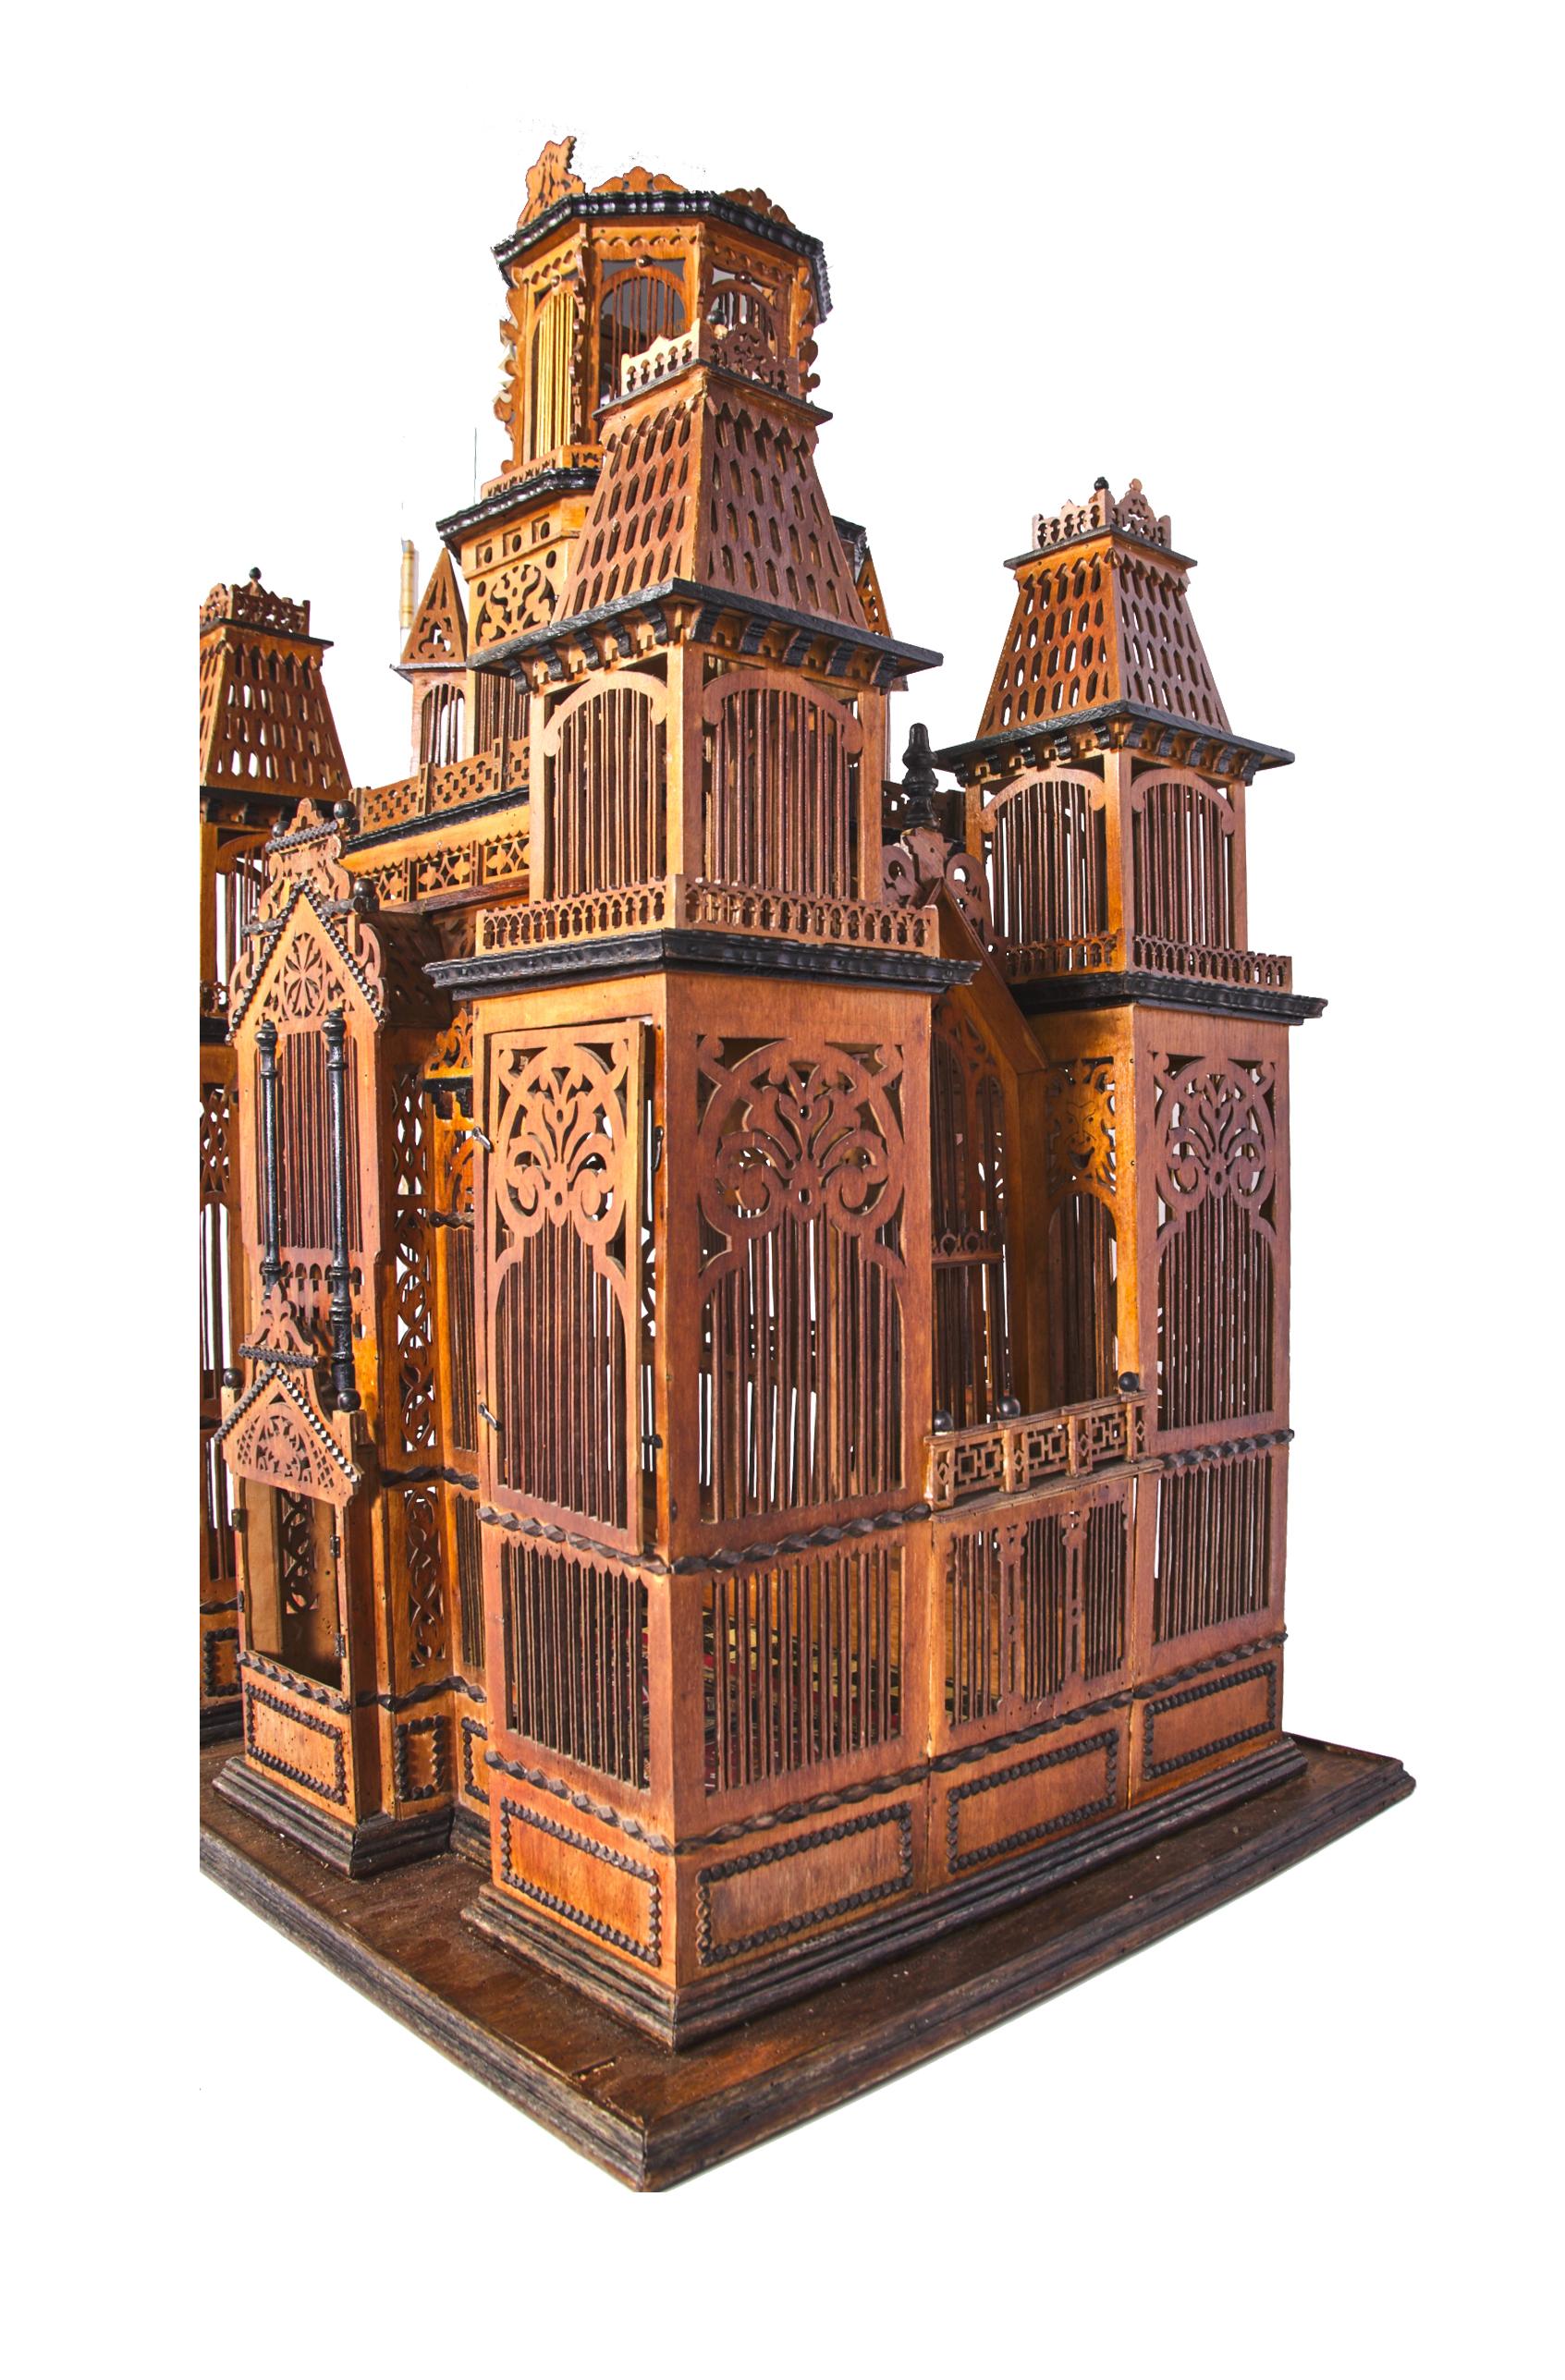 20th Century Exceptional Handmade Walnut Wood Birdcage from the Collection of Paul McDonald